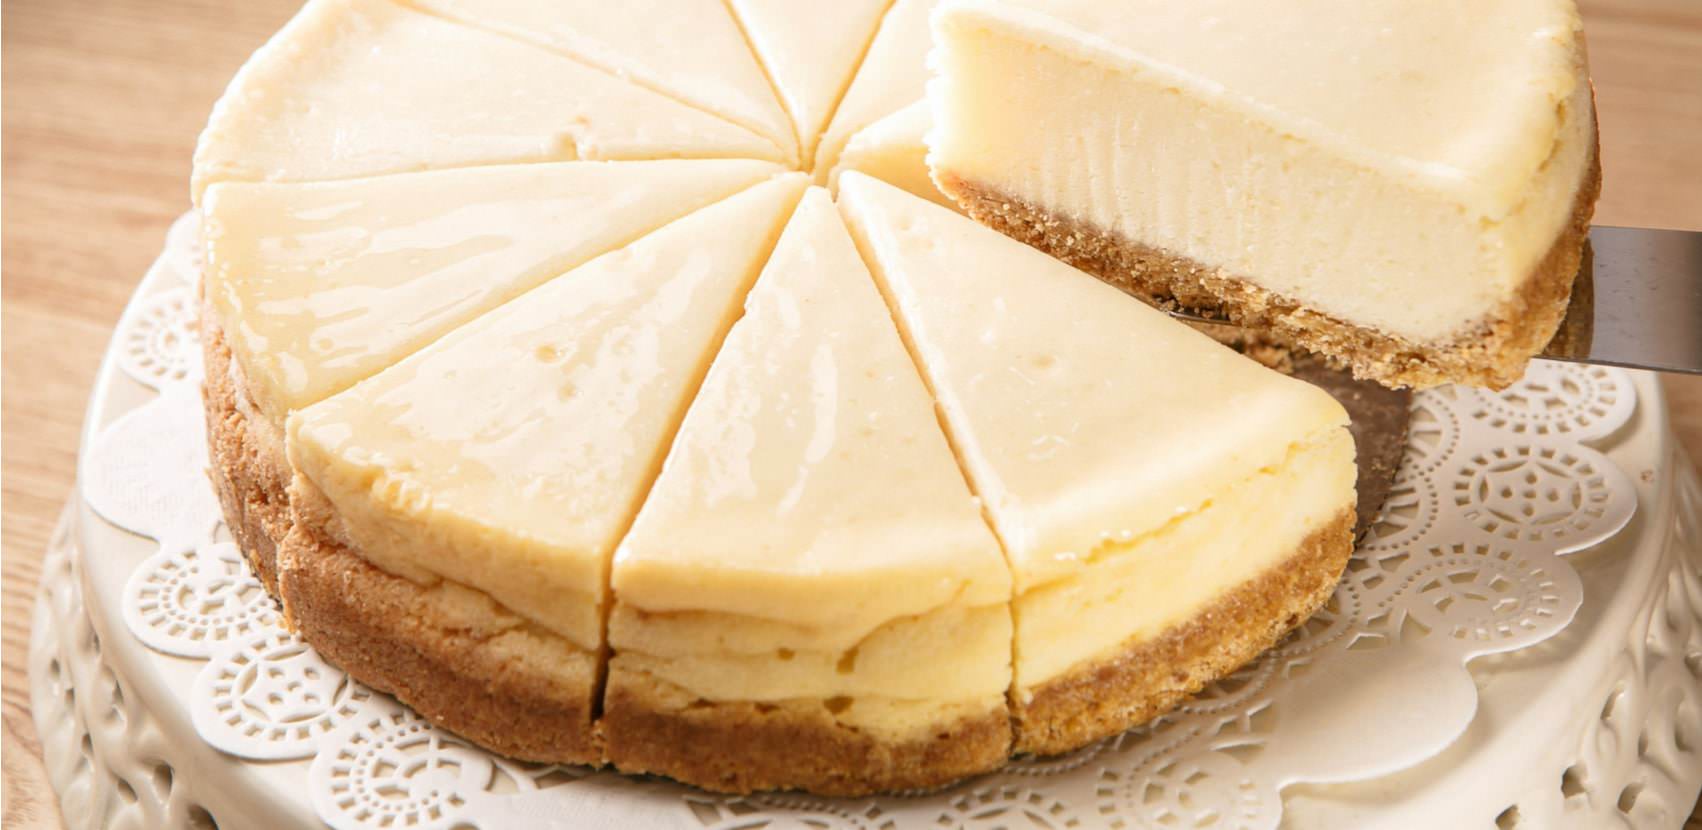 Cheesecake Aux Speculoos Desserts A L Italienne Galbani